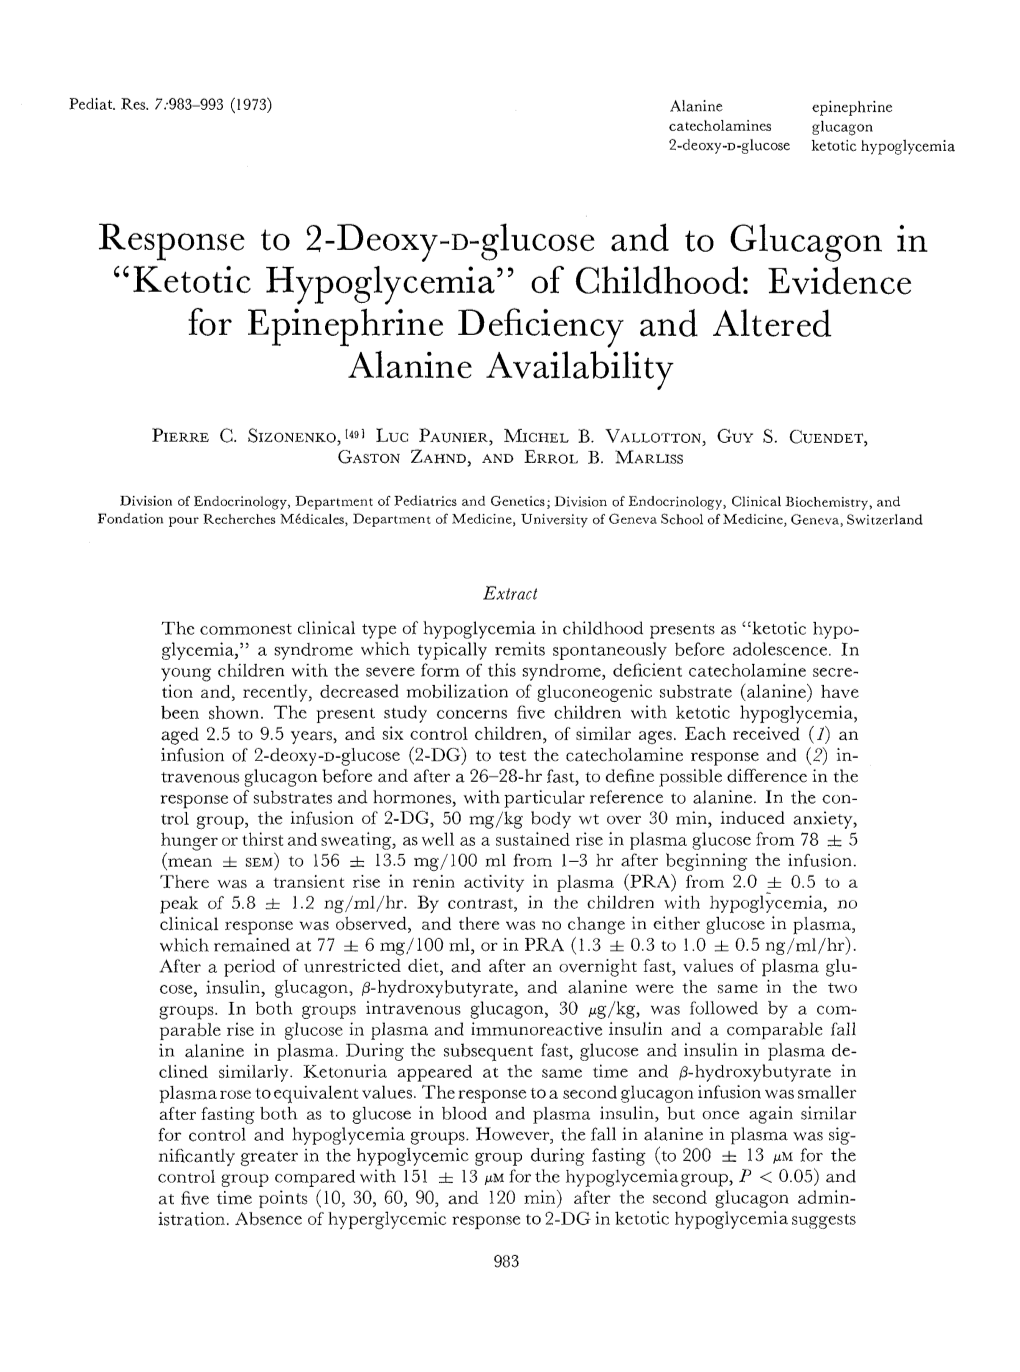 Response to 2-Deoxy-D-Glucose and to Glucagon in "Ketotic Hypoglycemia" of Childhood: Evidence for Epinephrine Deficiency and Altered Alanine Availability